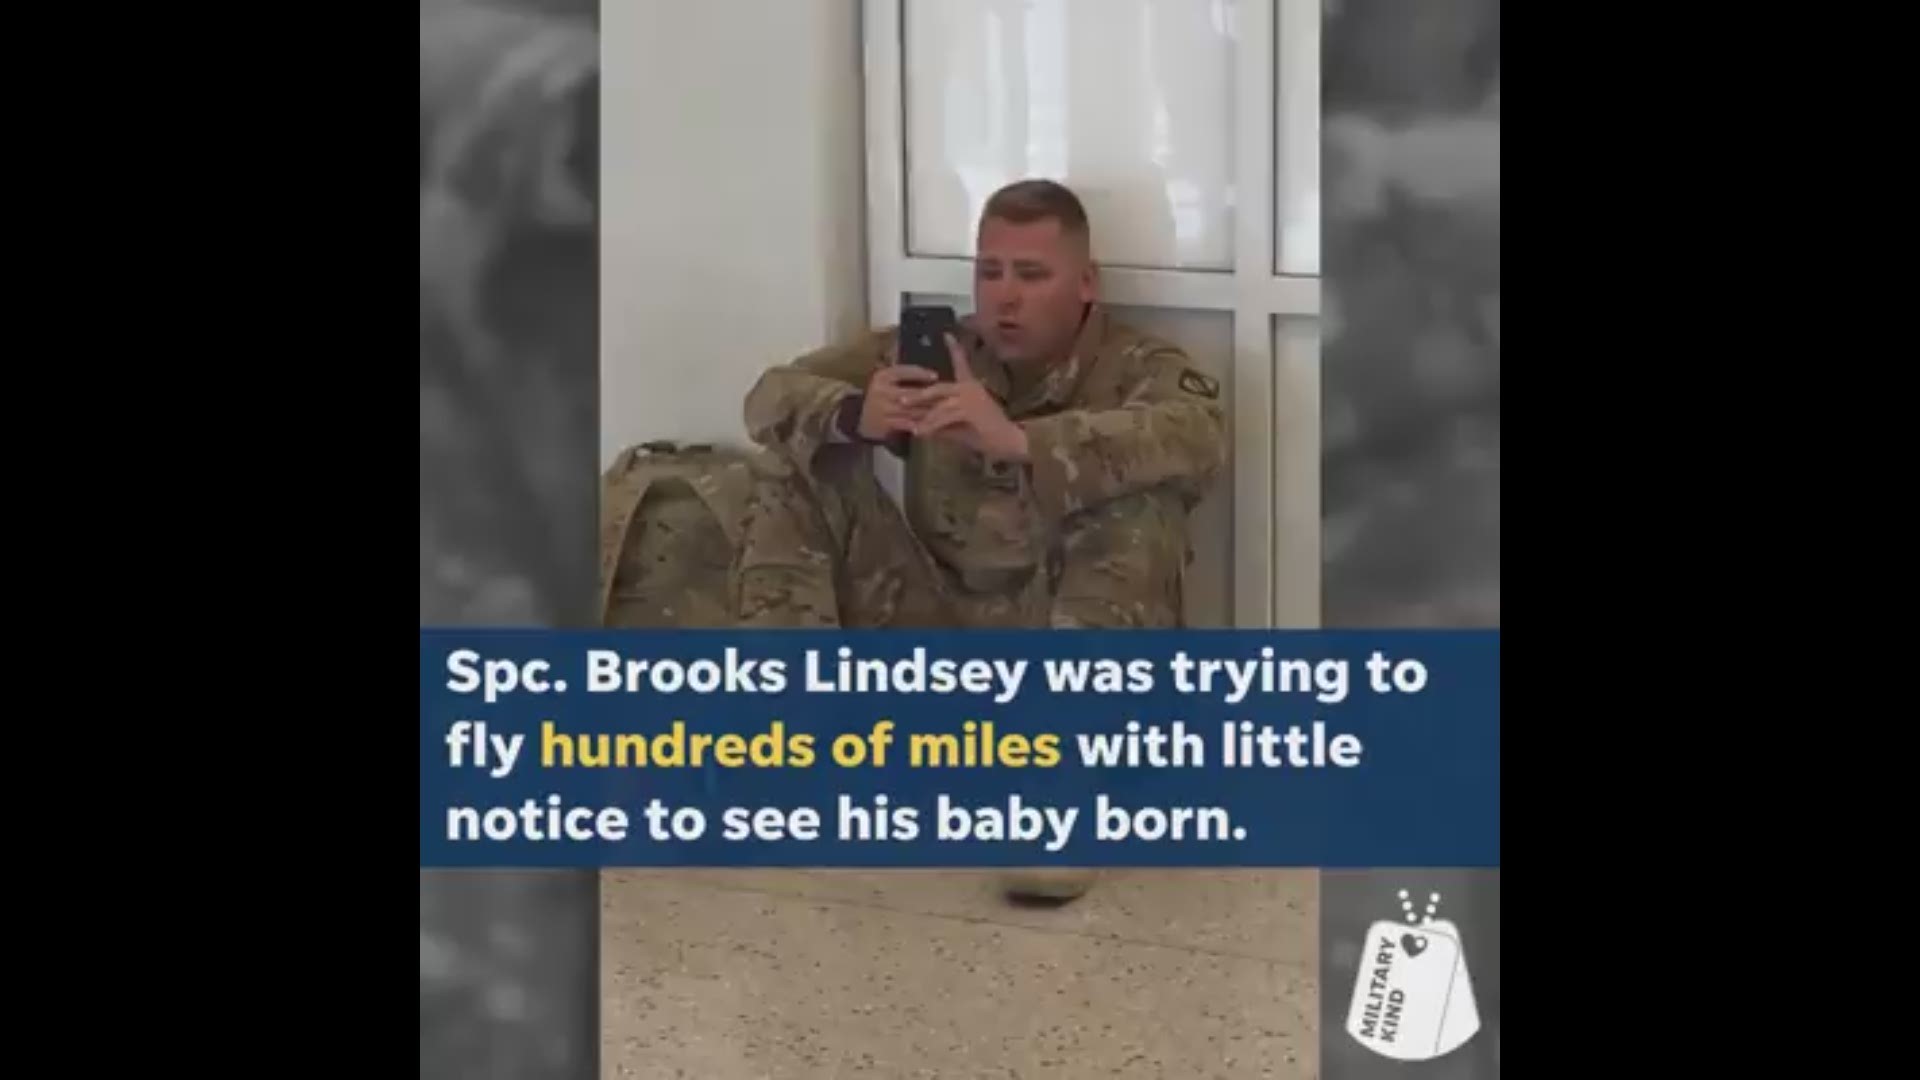 This soldier was rushing home to witness the birth of his daughter. When his flight got delayed, it ended up being a blessing in disguise. Militarykind, USA TODAY